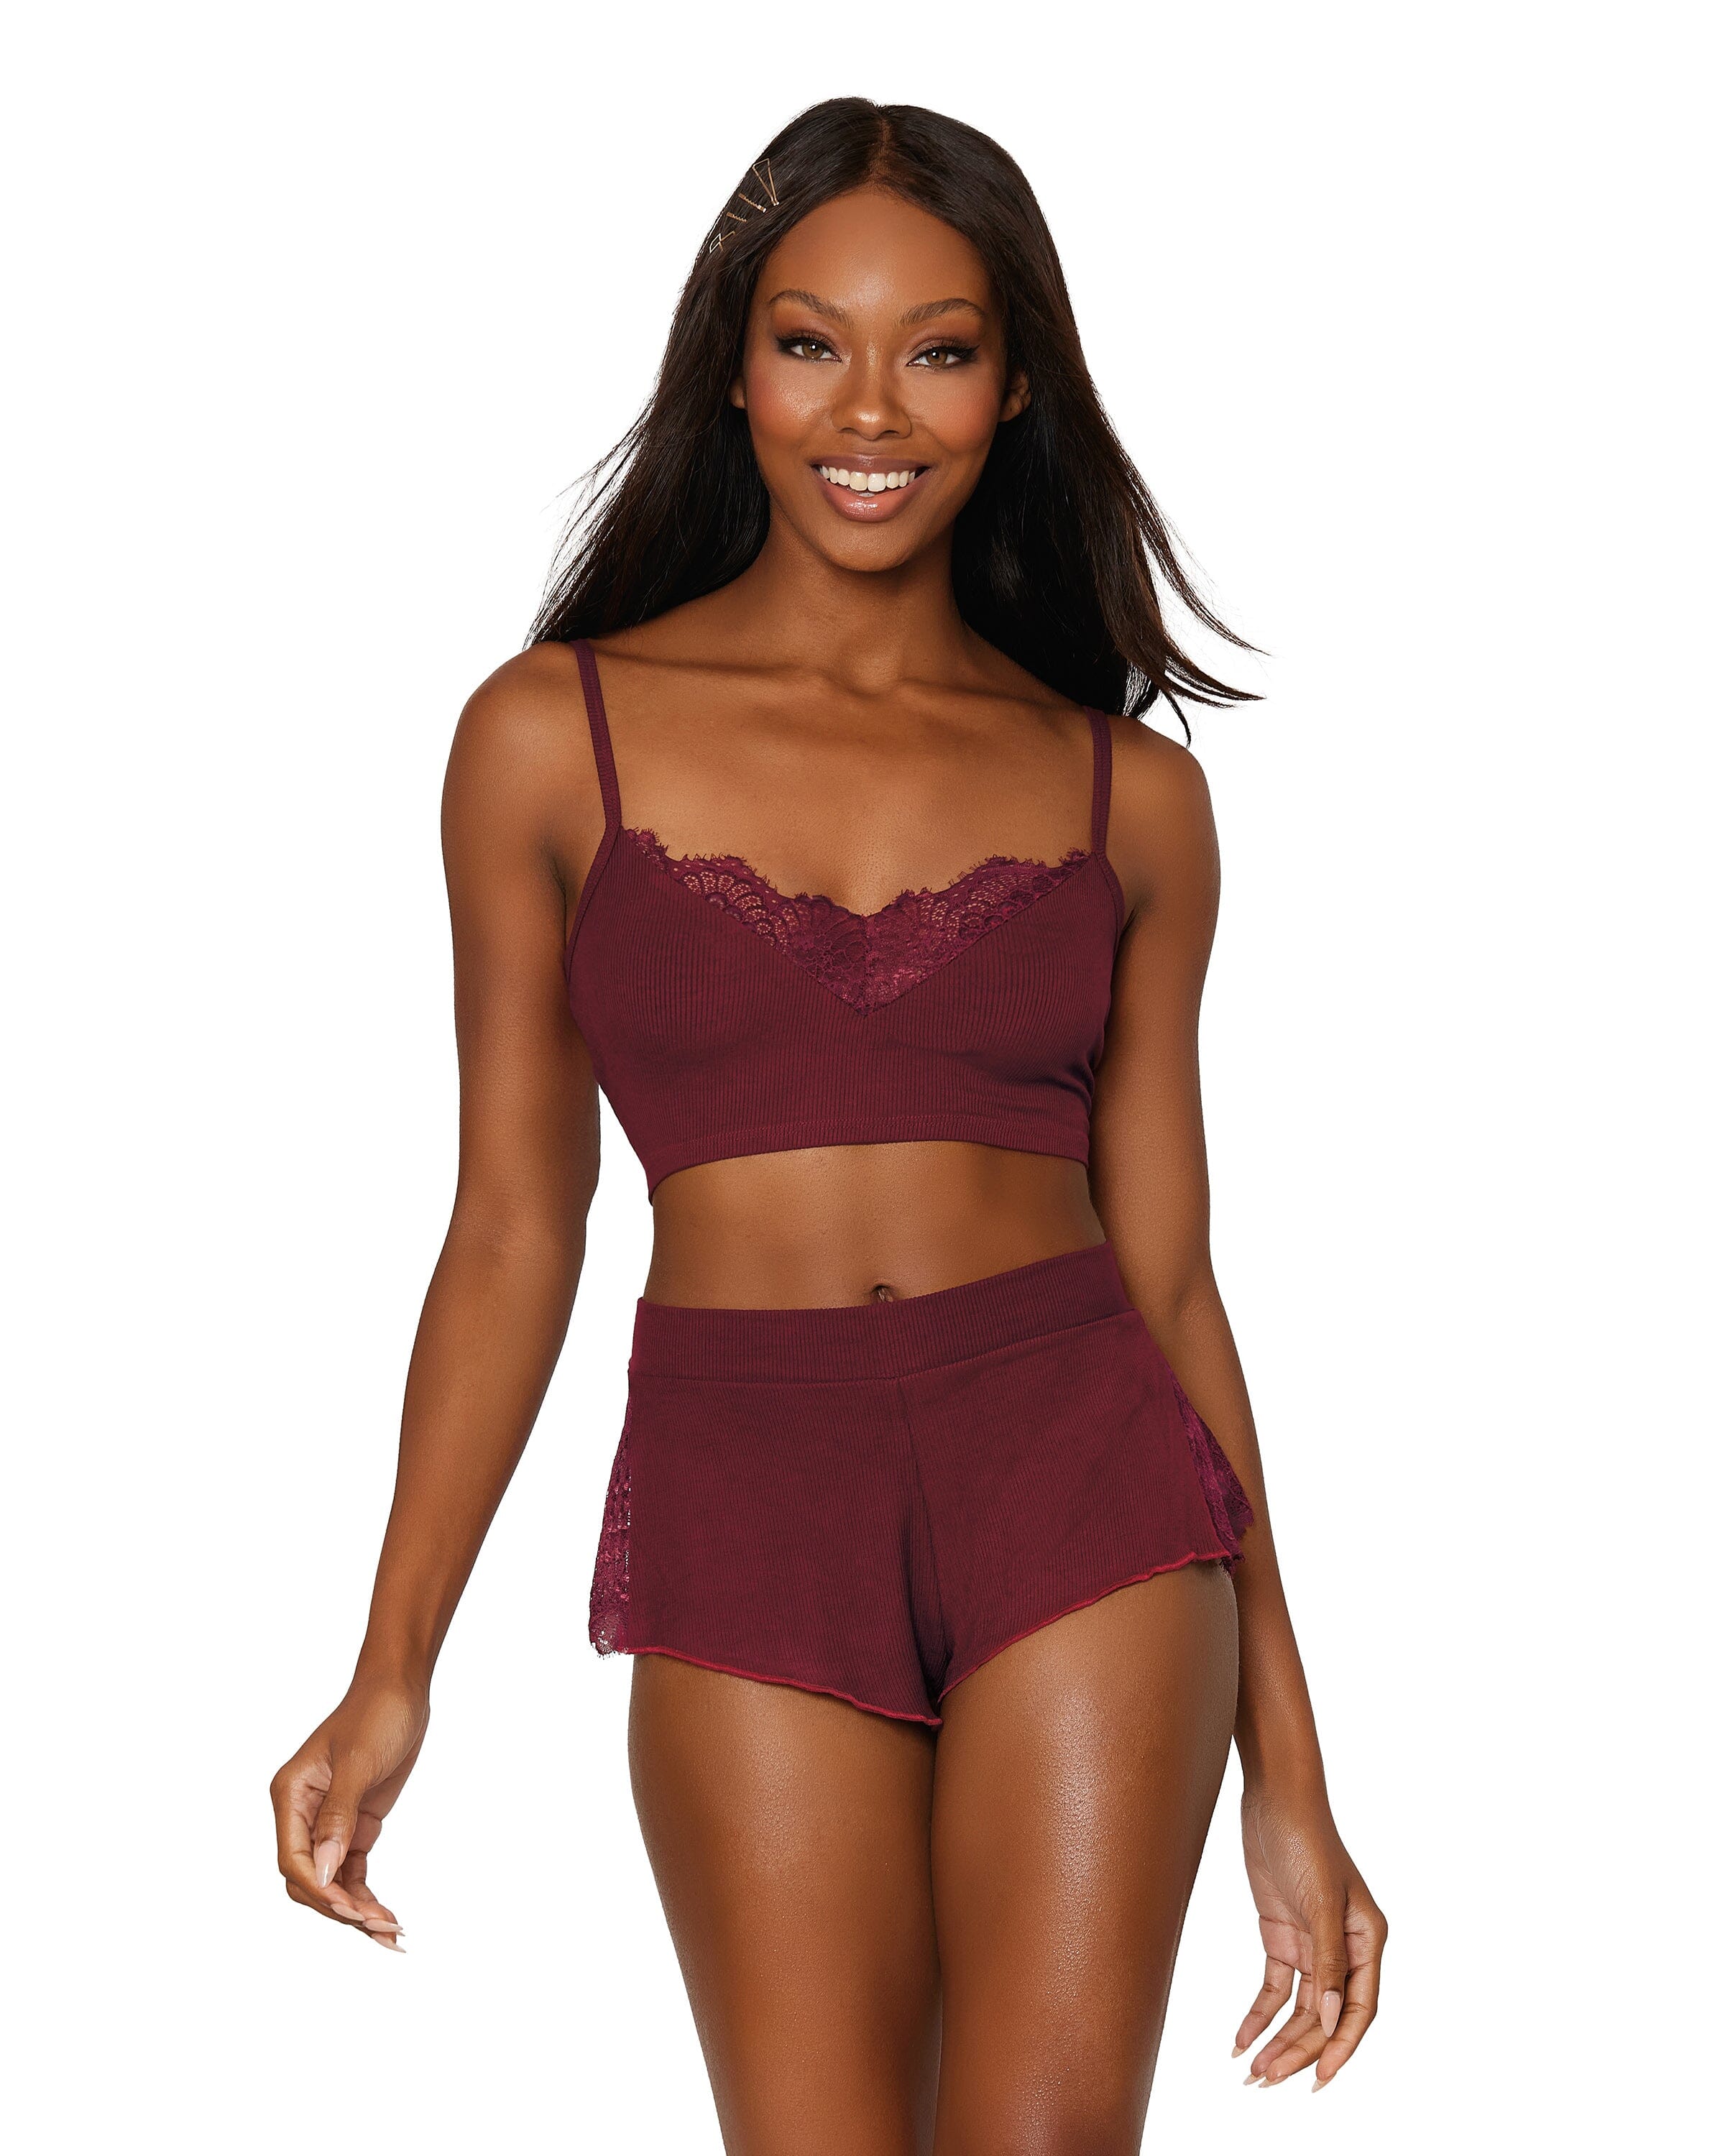 Dreamgirl Rib-knit sleepwear bralette and short set with lace inset details